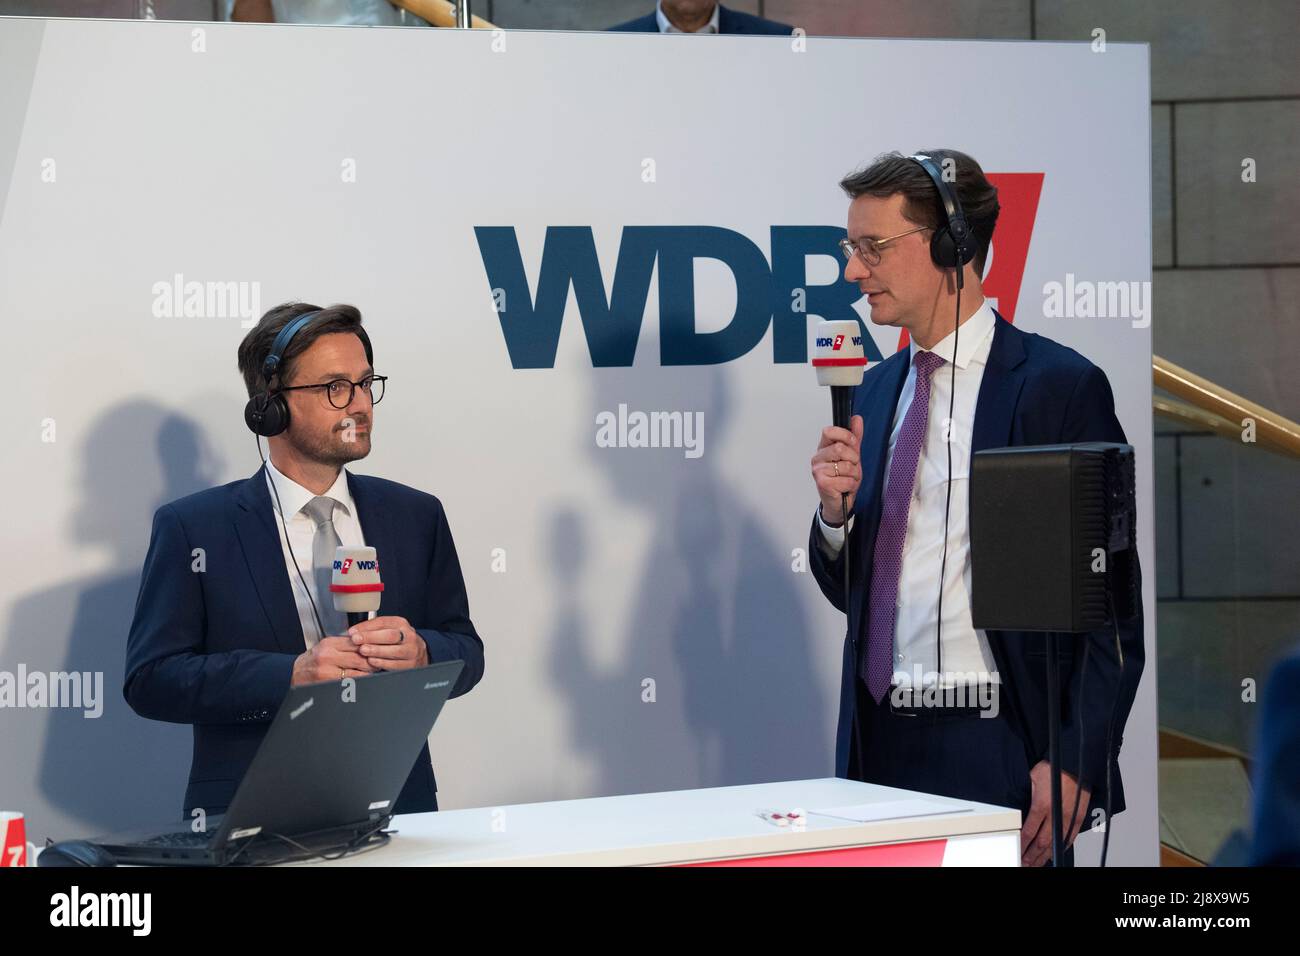 *** Thomas KUTSCHATY, SPD top candidate, and Hendrik WUEST, Wust, CDU, Prime Minister of North Rhine-Westphalia, - in the WDR2 radio interview, projections and statements in the Duesseldorf state parliament, state elections in North Rhine-Westphalia NRW, on May 15th, 2022 in Duesseldorf/Germany. Stock Photo